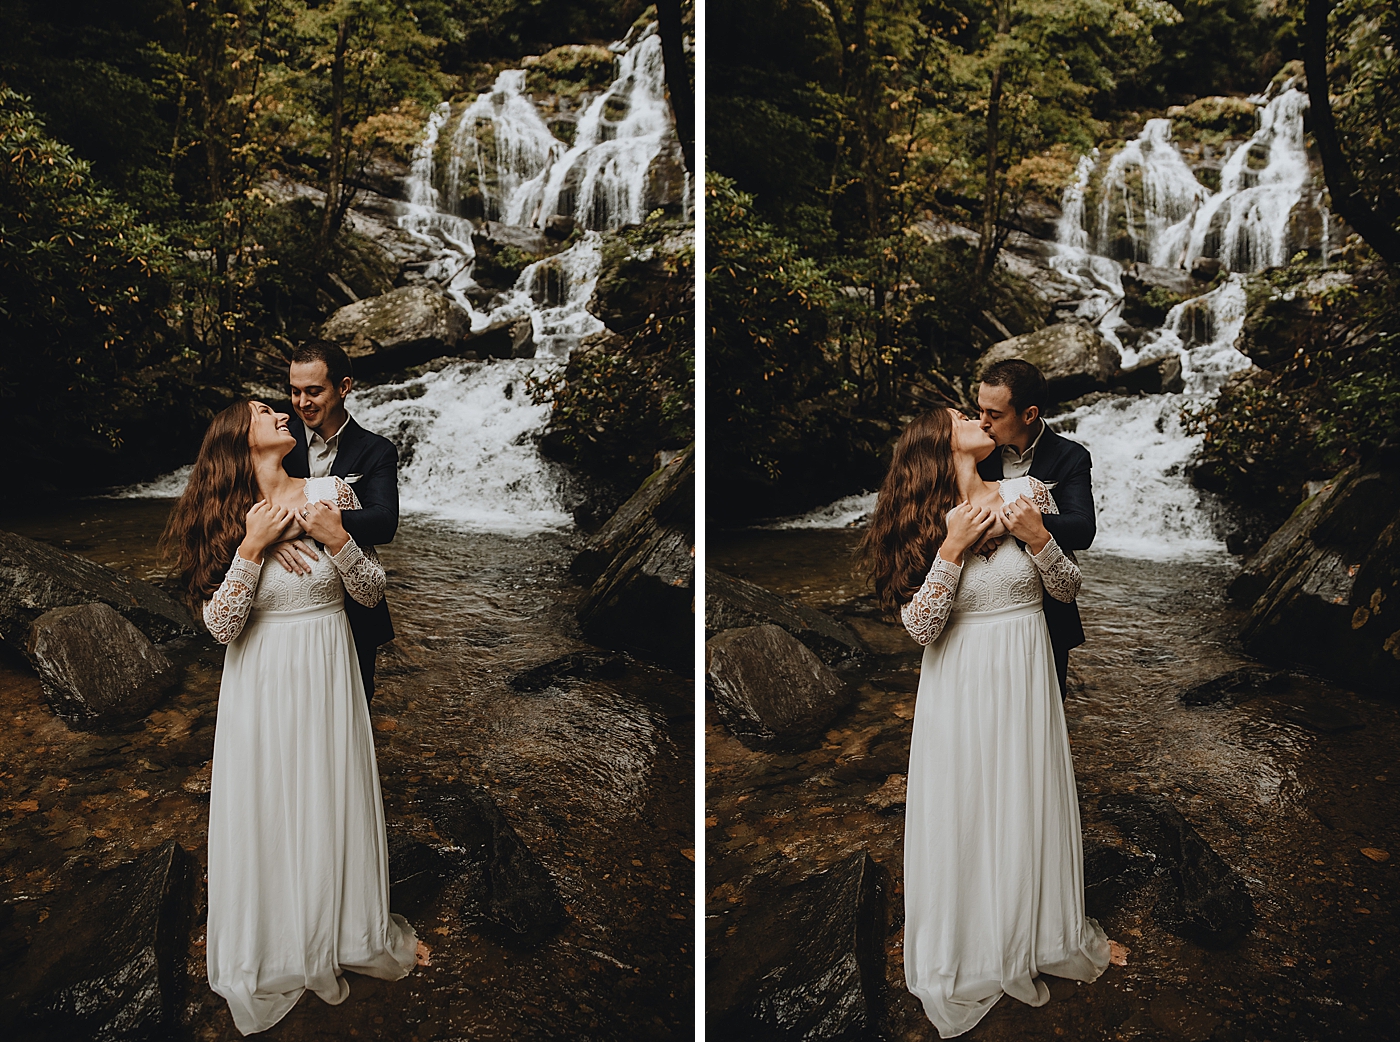 Groom holding Bride kissing in rocky green forest Catawba Falls Asheville, NC Elopement Photography captured by Maggie Alvarez Photography